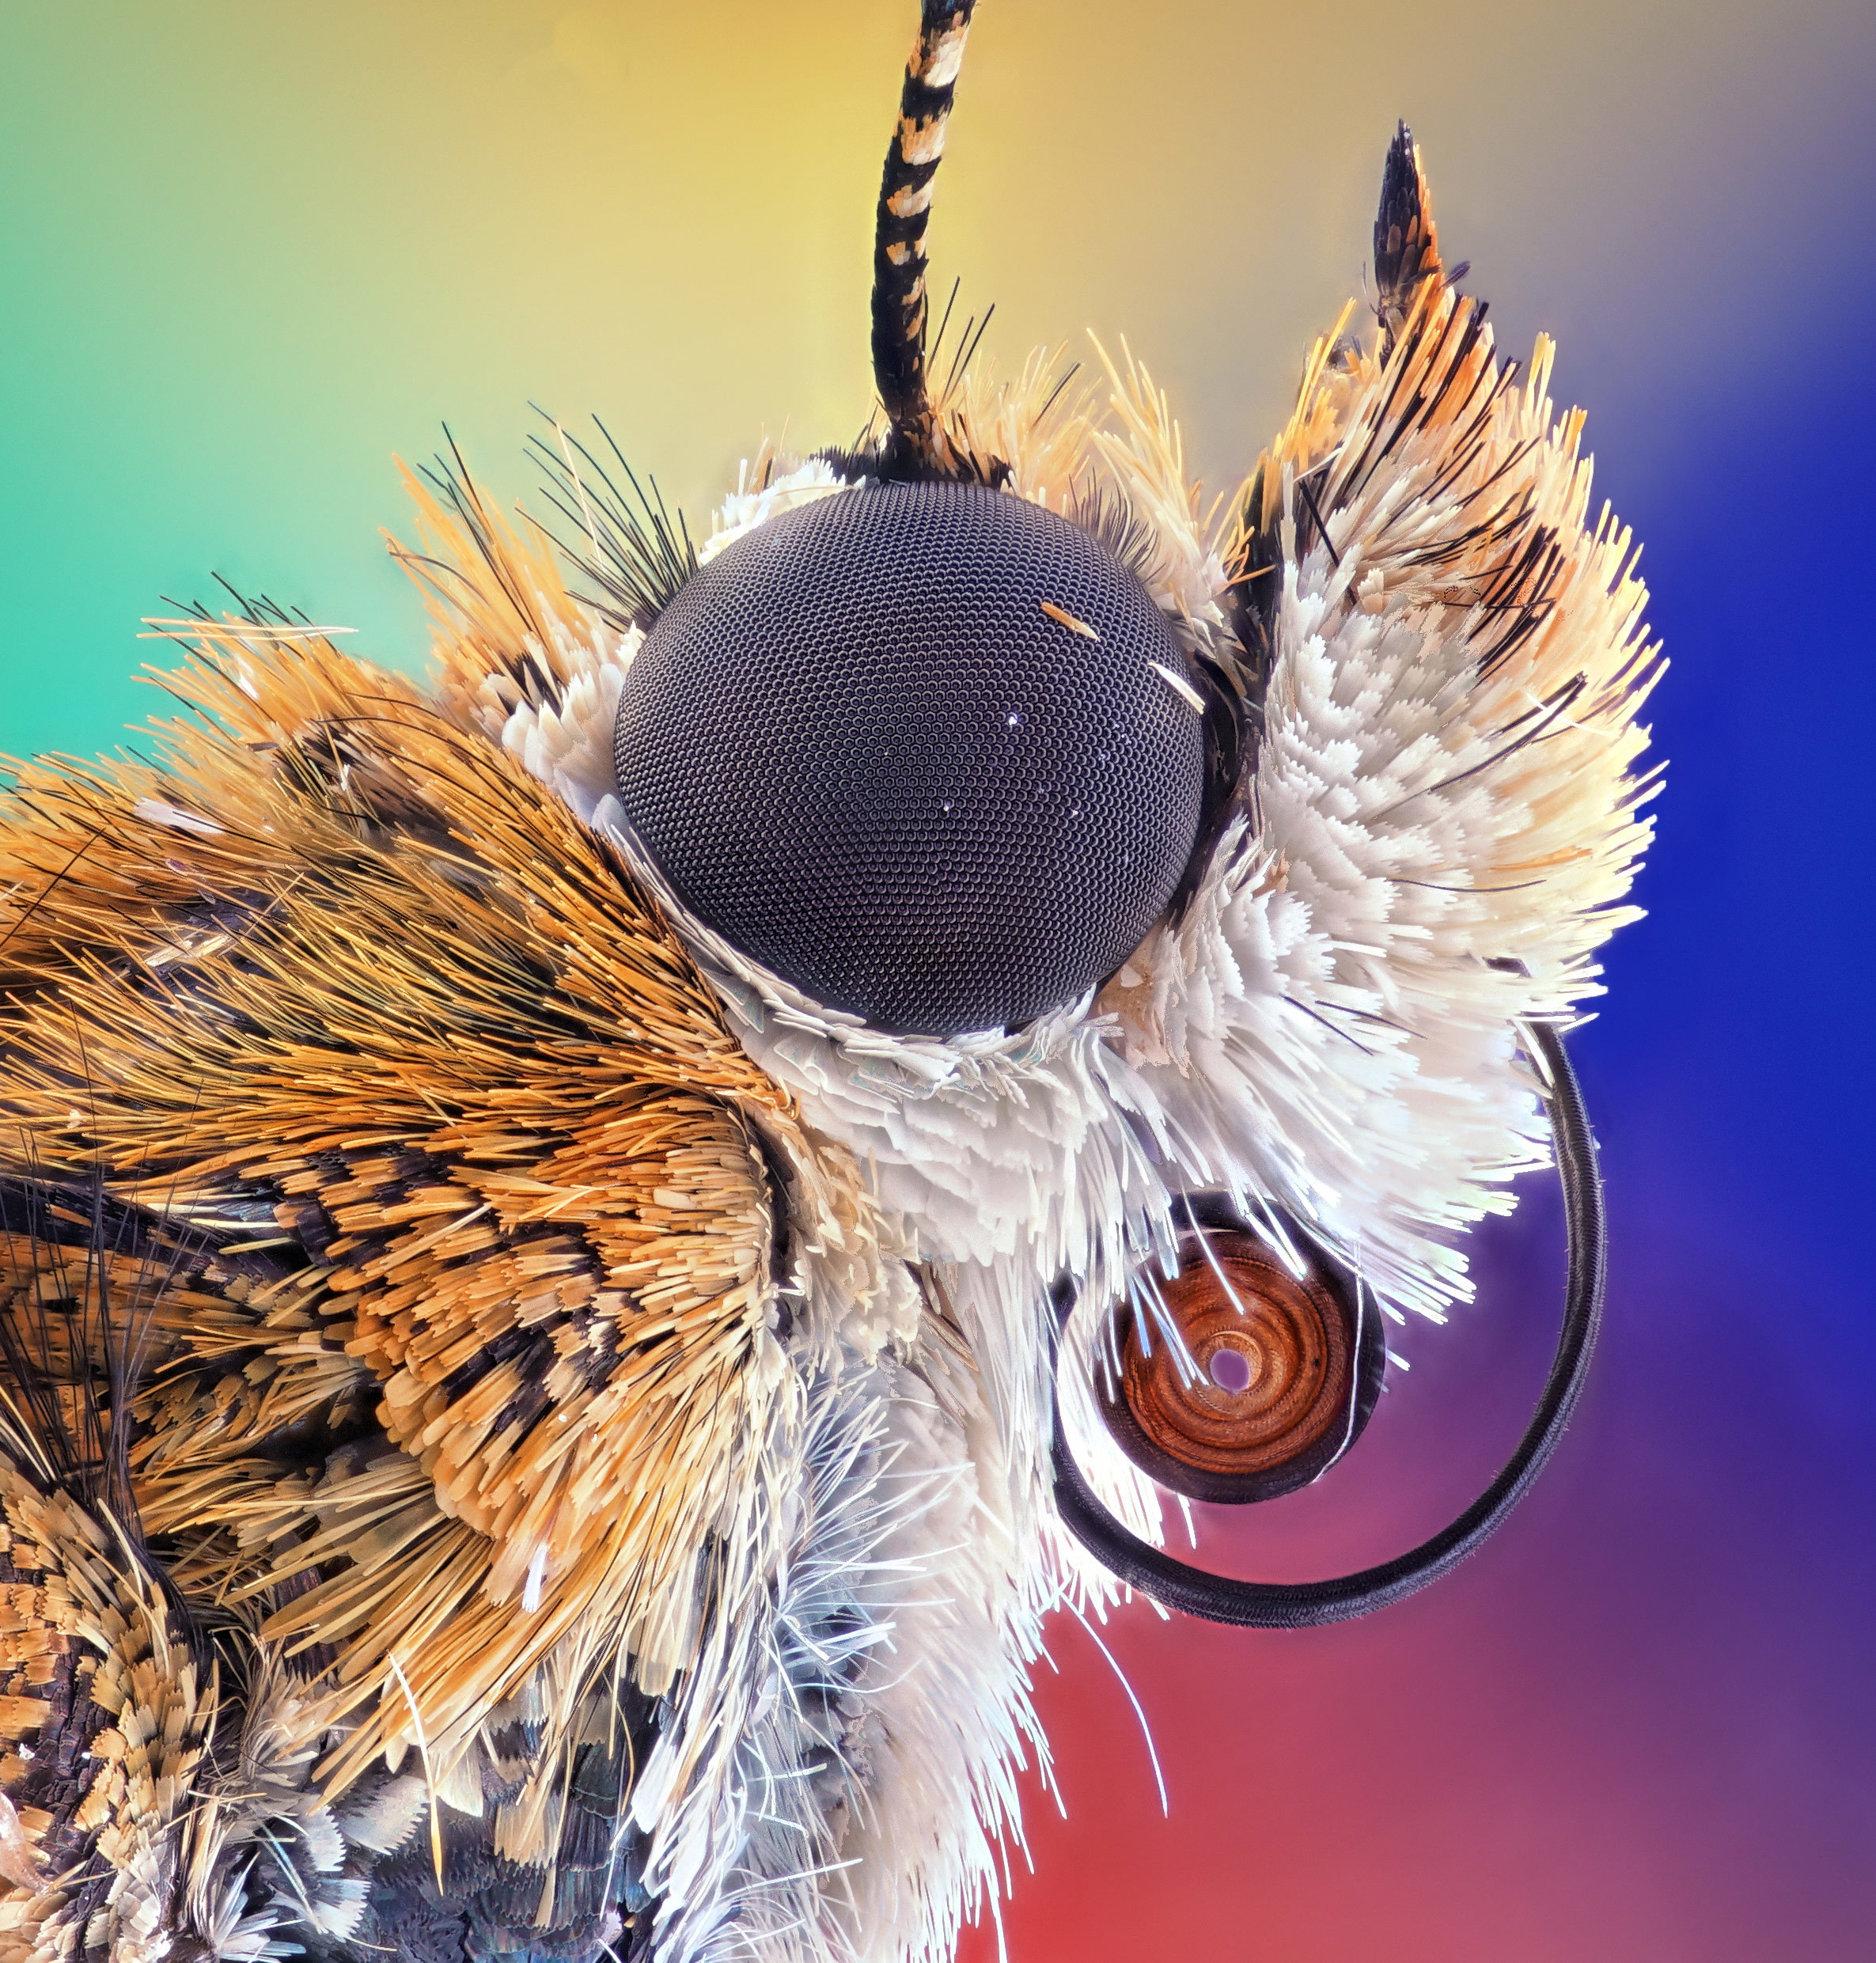 2020 nikon photomicrography competition winners - Bogong moth